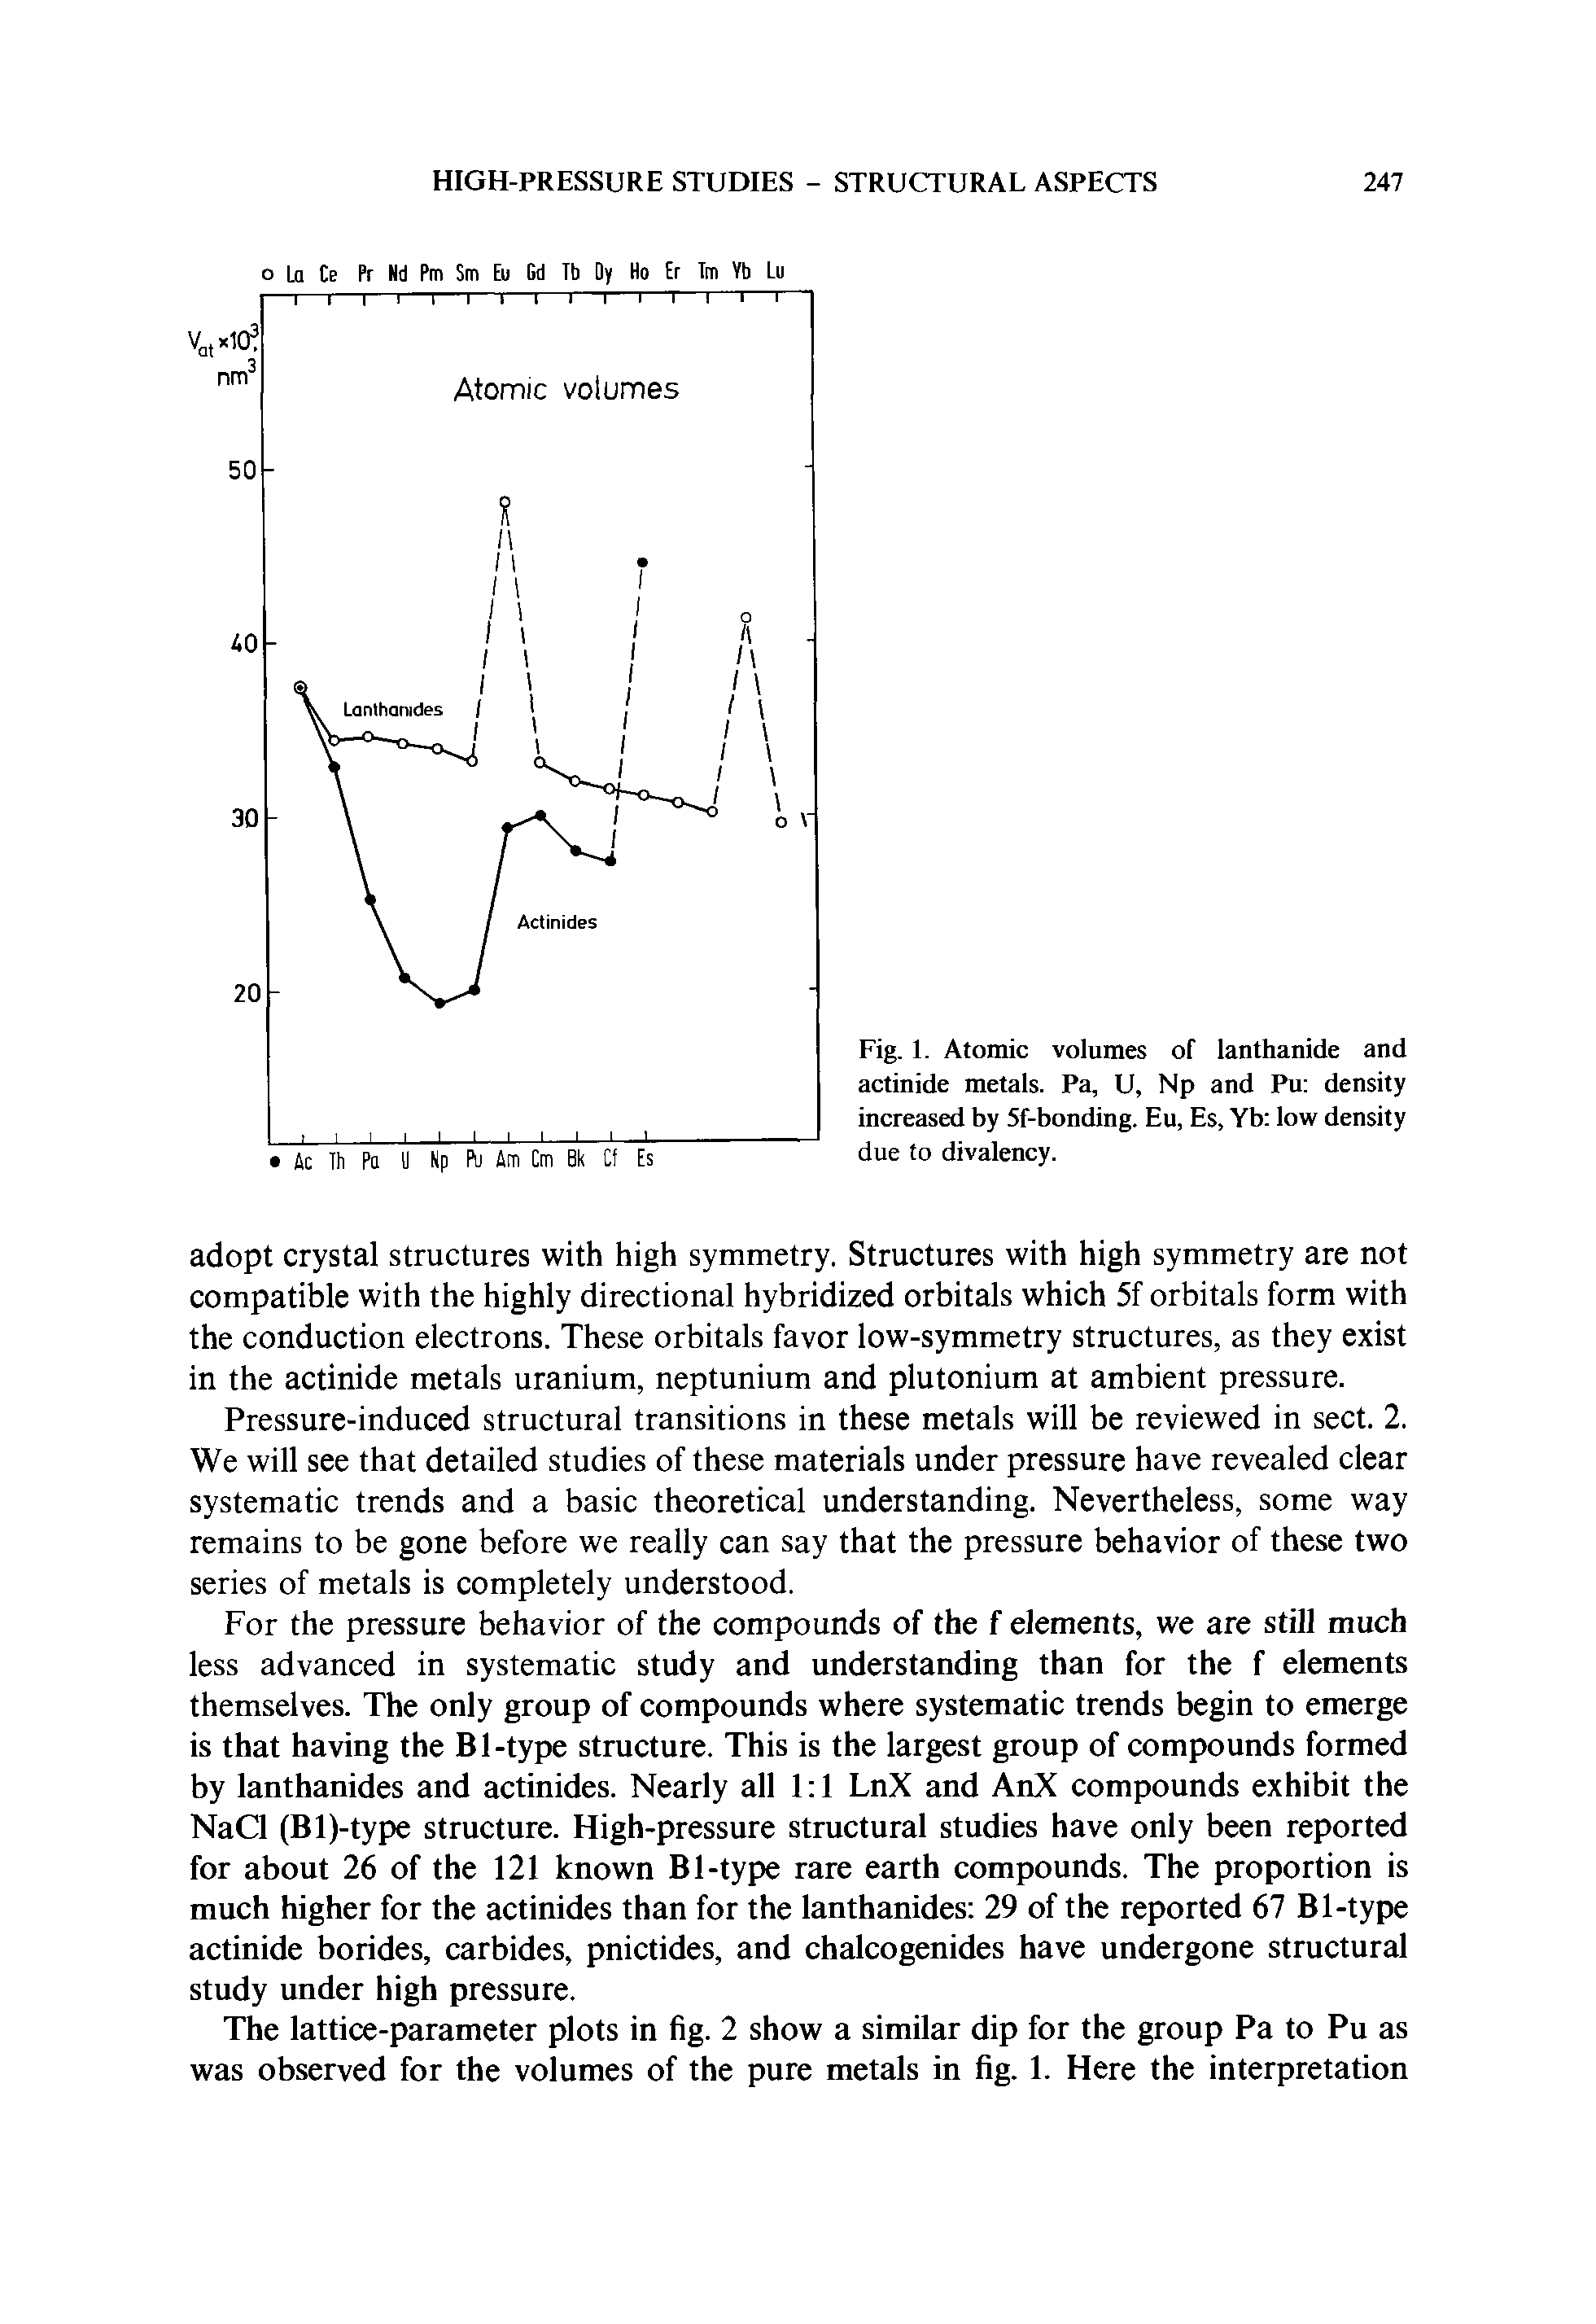 Fig. 1. Atomic volumes of lanthanide and actinide metals. Pa, U, Np and Pu density increased by 5f-bonding. Eu, Es, Yb low density due to divalency.